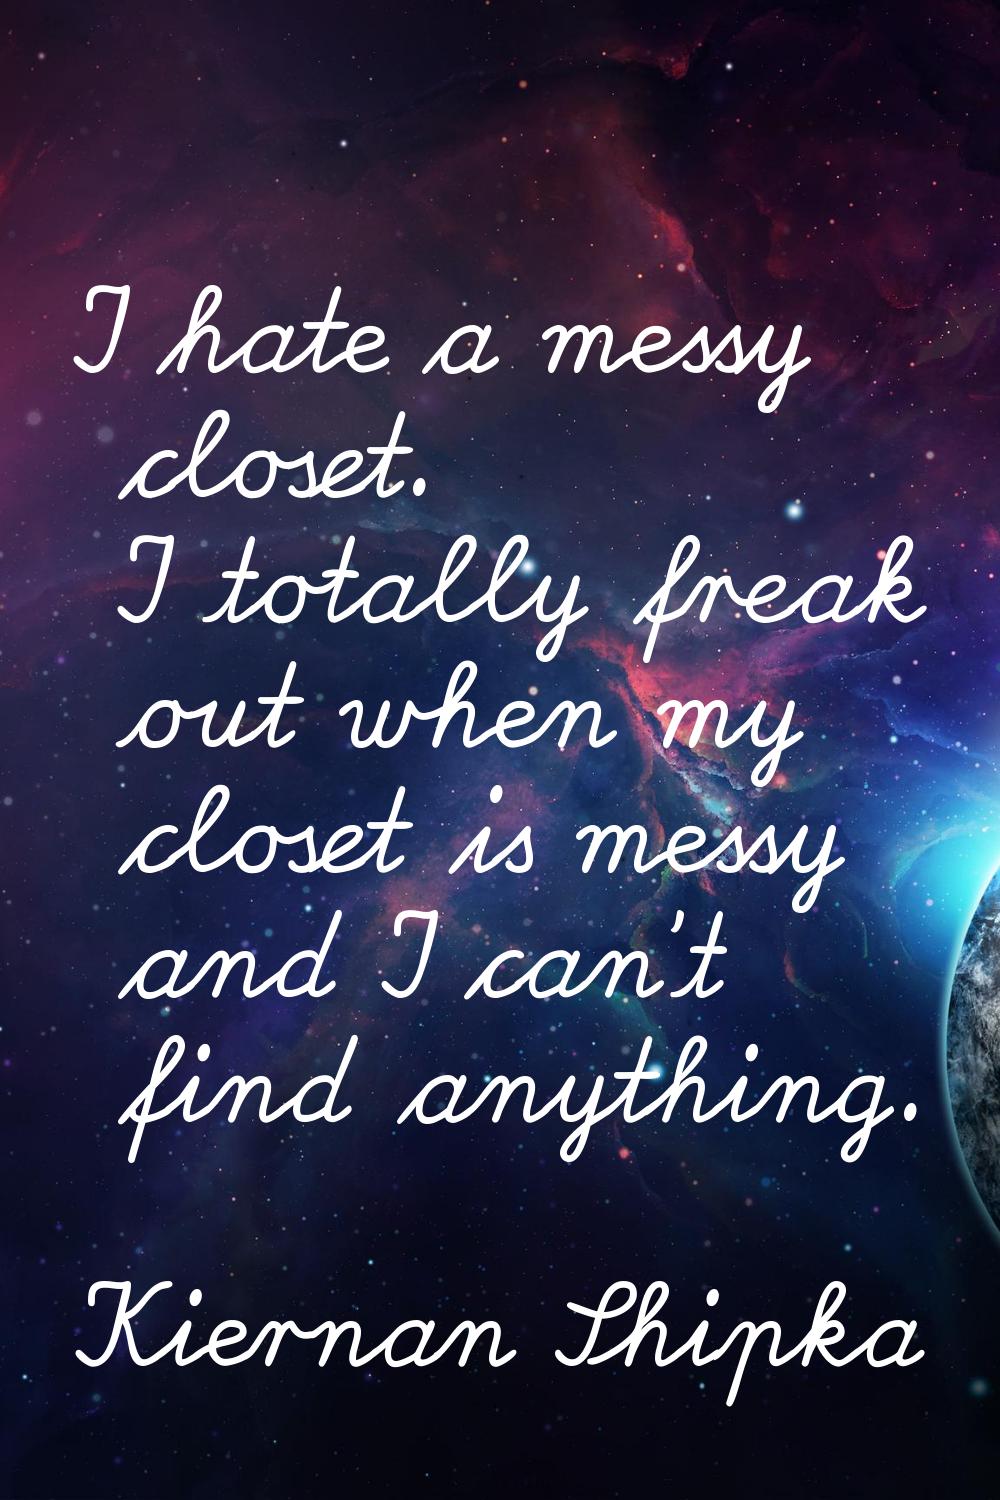 I hate a messy closet. I totally freak out when my closet is messy and I can't find anything.